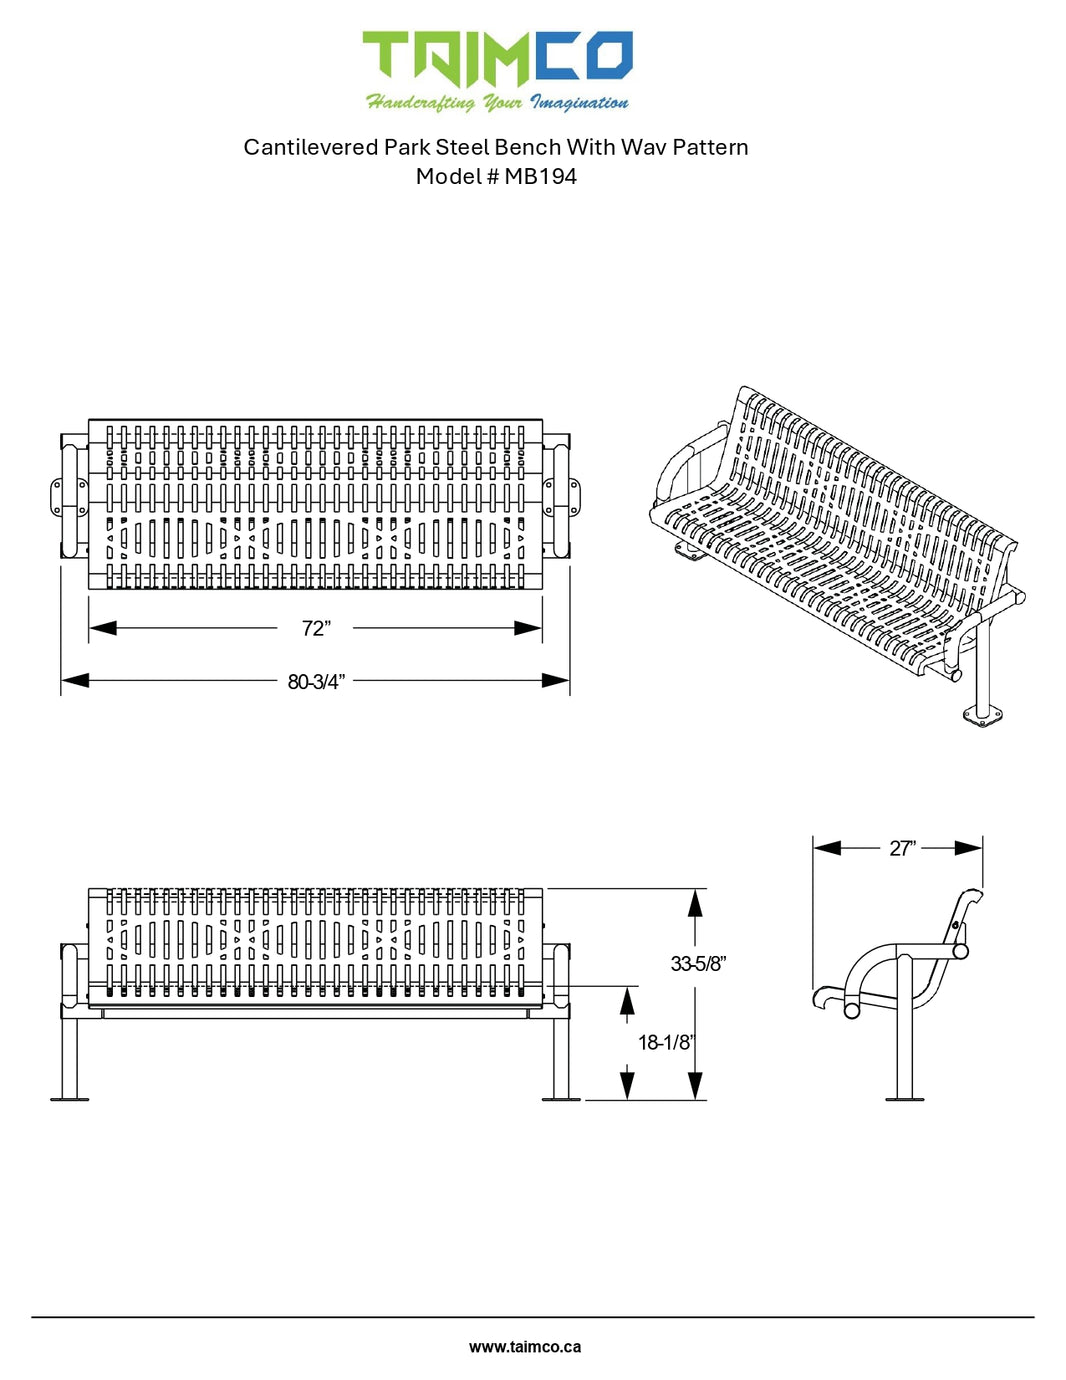 Cantilevered Park Steel Bench with wav pattern | Model # MB194